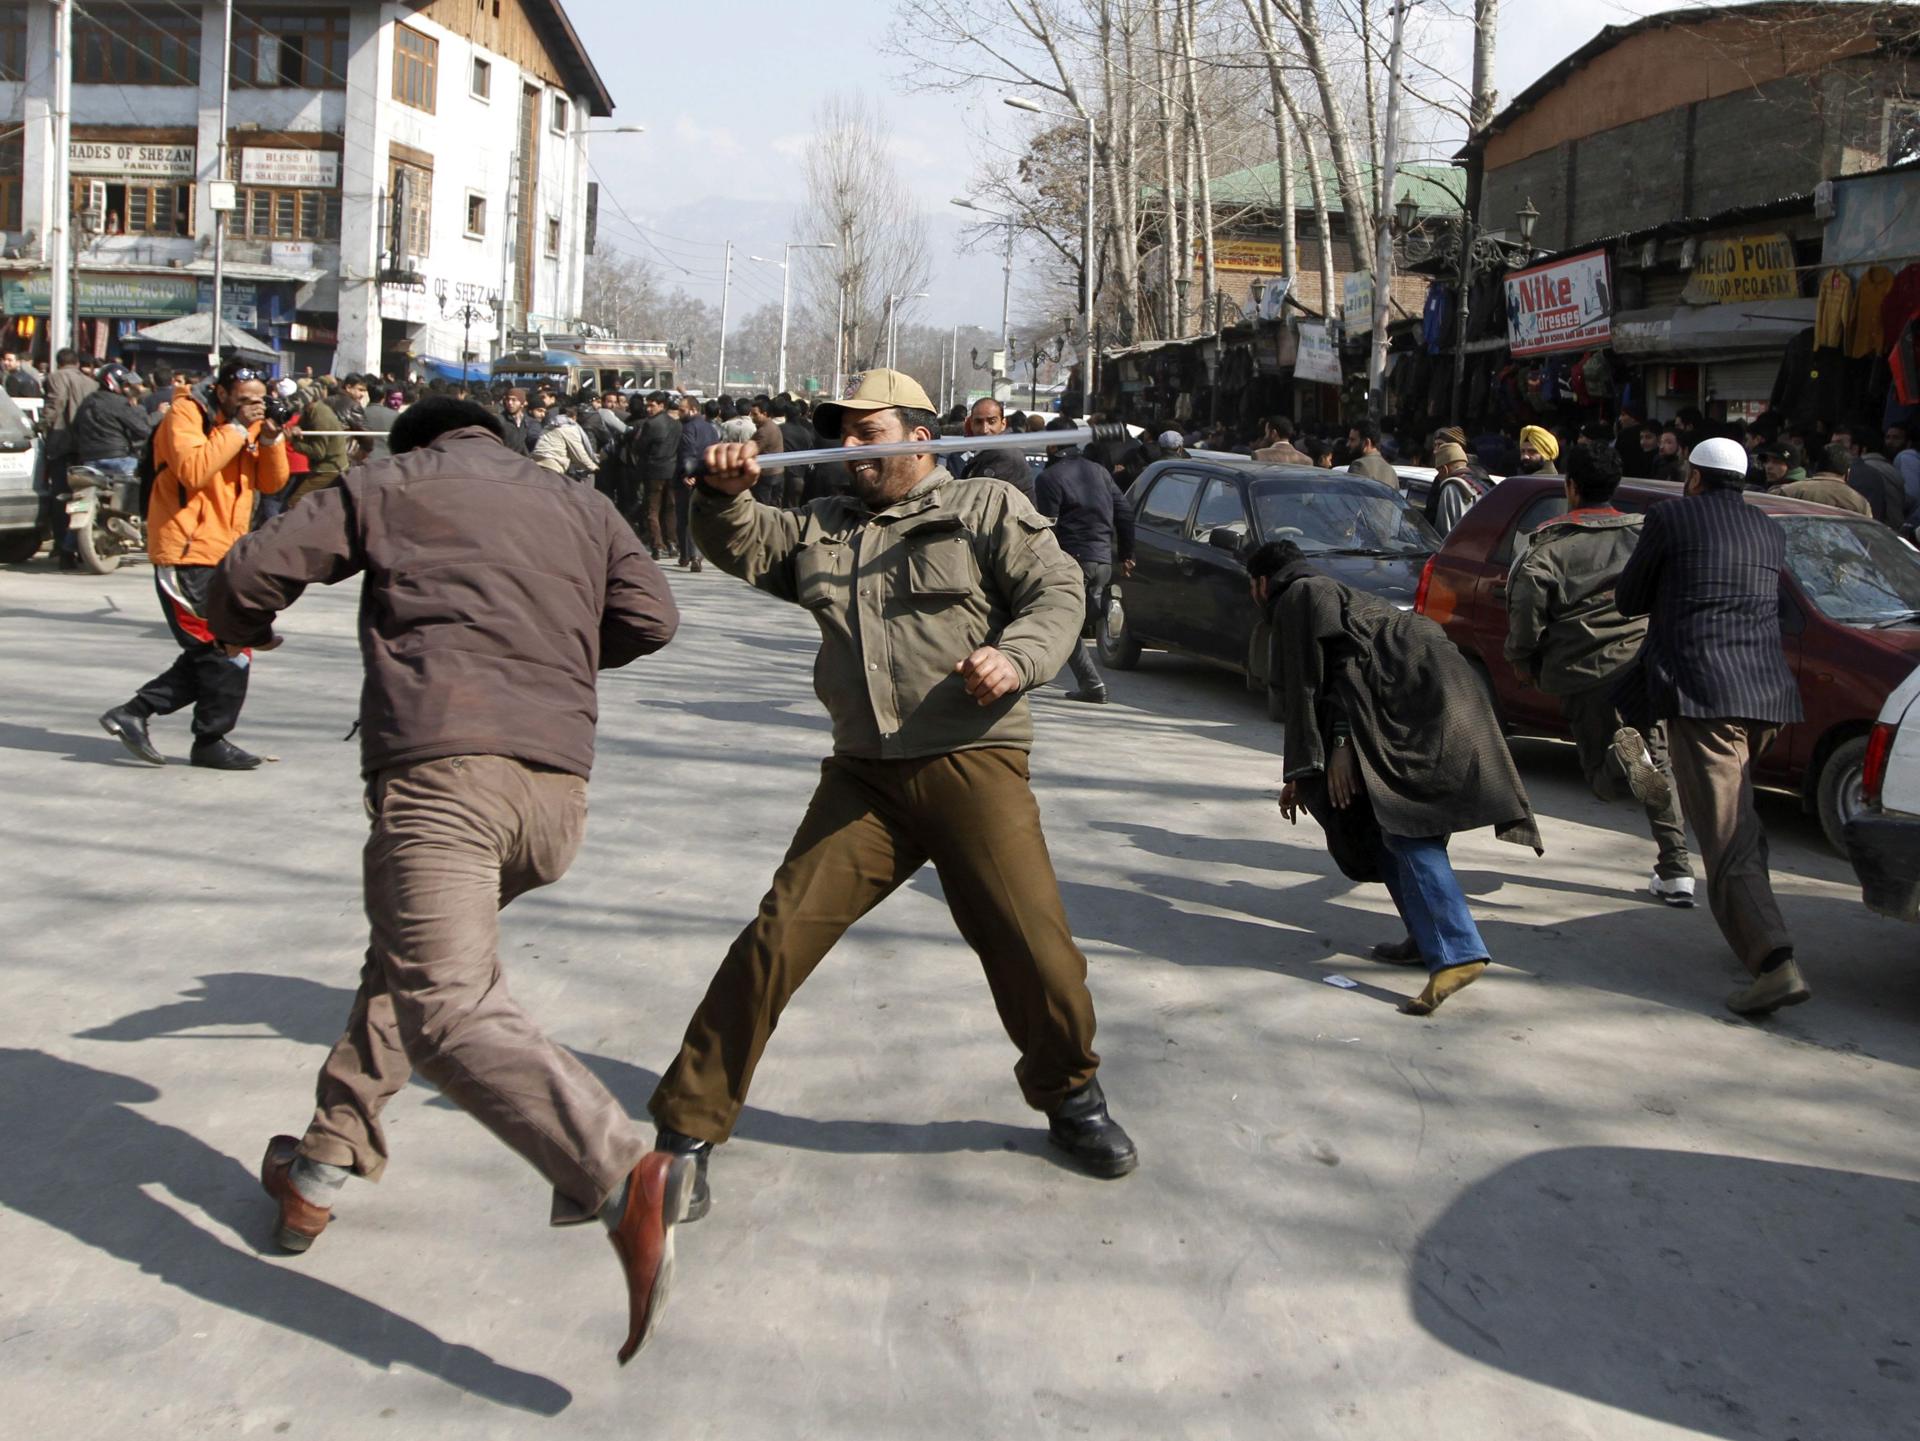 Indian police charge demonstraters during a protest against the newly approved Drug Policy in Srinagar, the summer capital of Indian Kashmir, 09 February 2012. EPA/FILE/FAROOQ KHAN